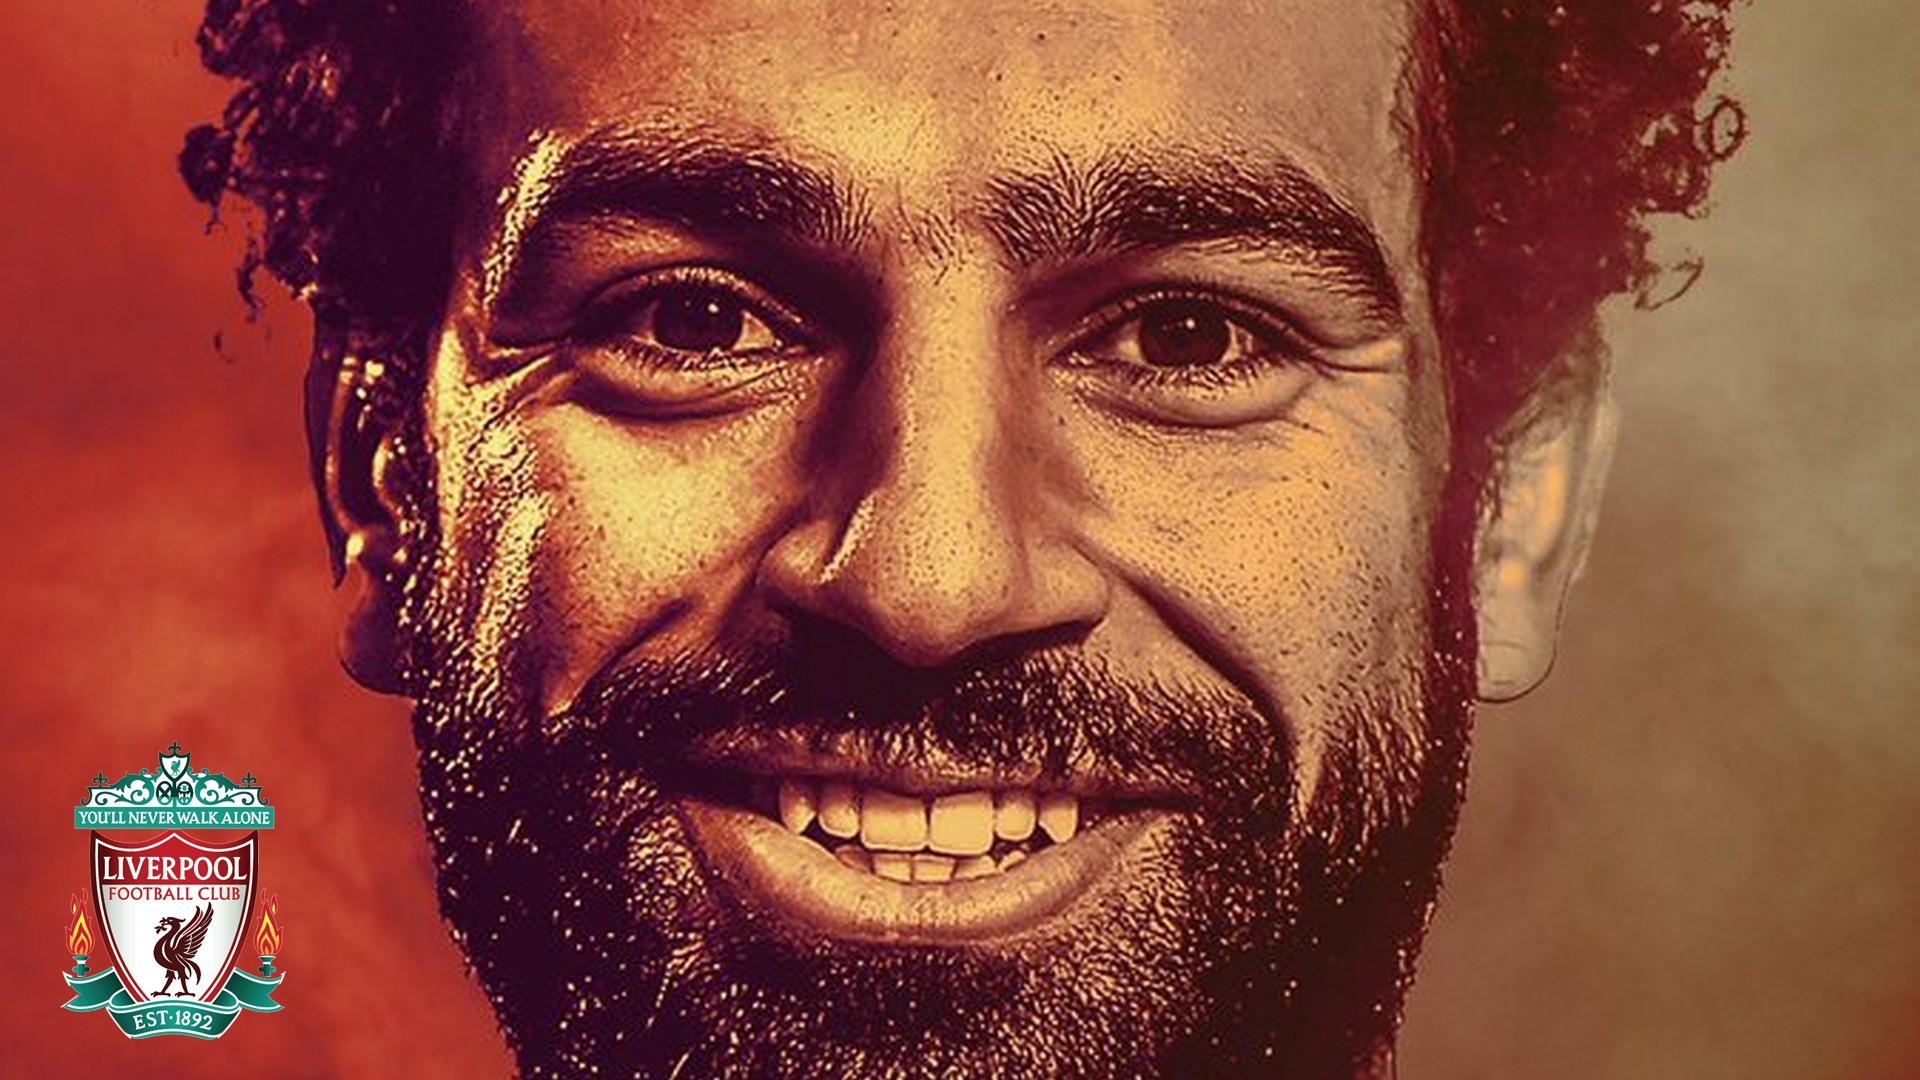 Mohamed Salah Liverpool Desktop Backgrounds HD with image resolution 1920x1080 pixel. You can use this wallpaper as background for your desktop Computer Screensavers, Android or iPhone smartphones